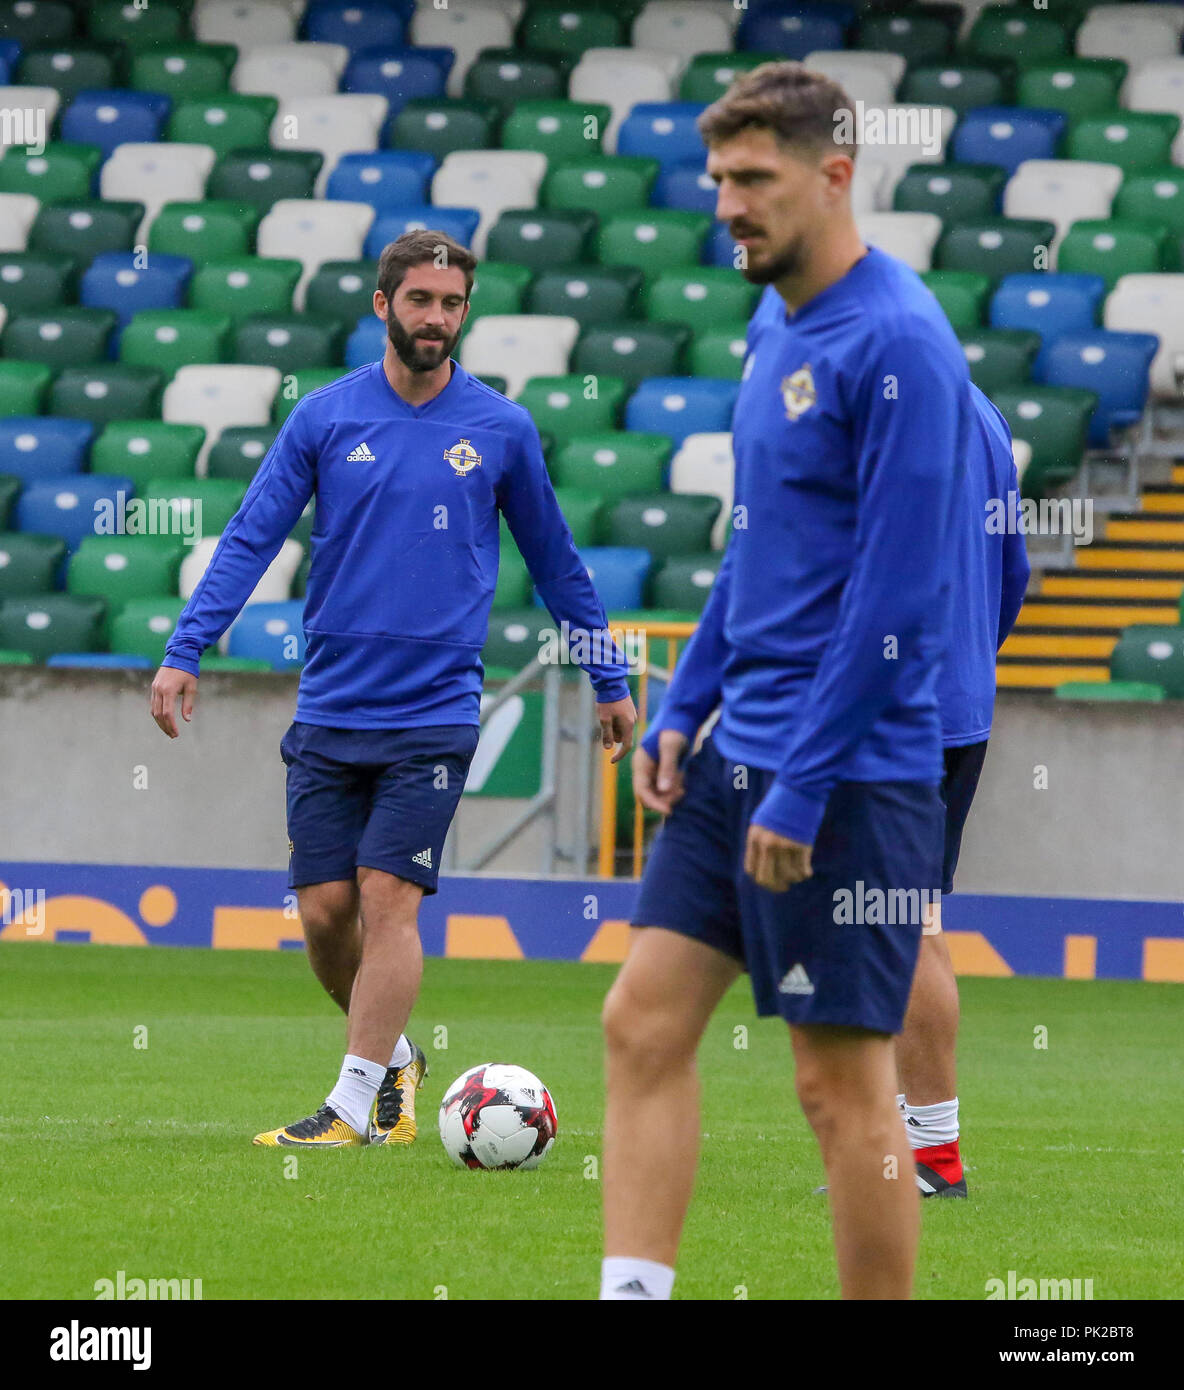 Windsor Park, Belfast, Northern Ireland. 10 September 2018. After Saturday's defeat in the UEFA Nations League, Northern Ireland returned to training this morning at Windsor Park. Tomorrow night they play Israel in a friendly international. Will Grigg (left) in training. Credit: David Hunter/Alamy Live News. Stock Photo